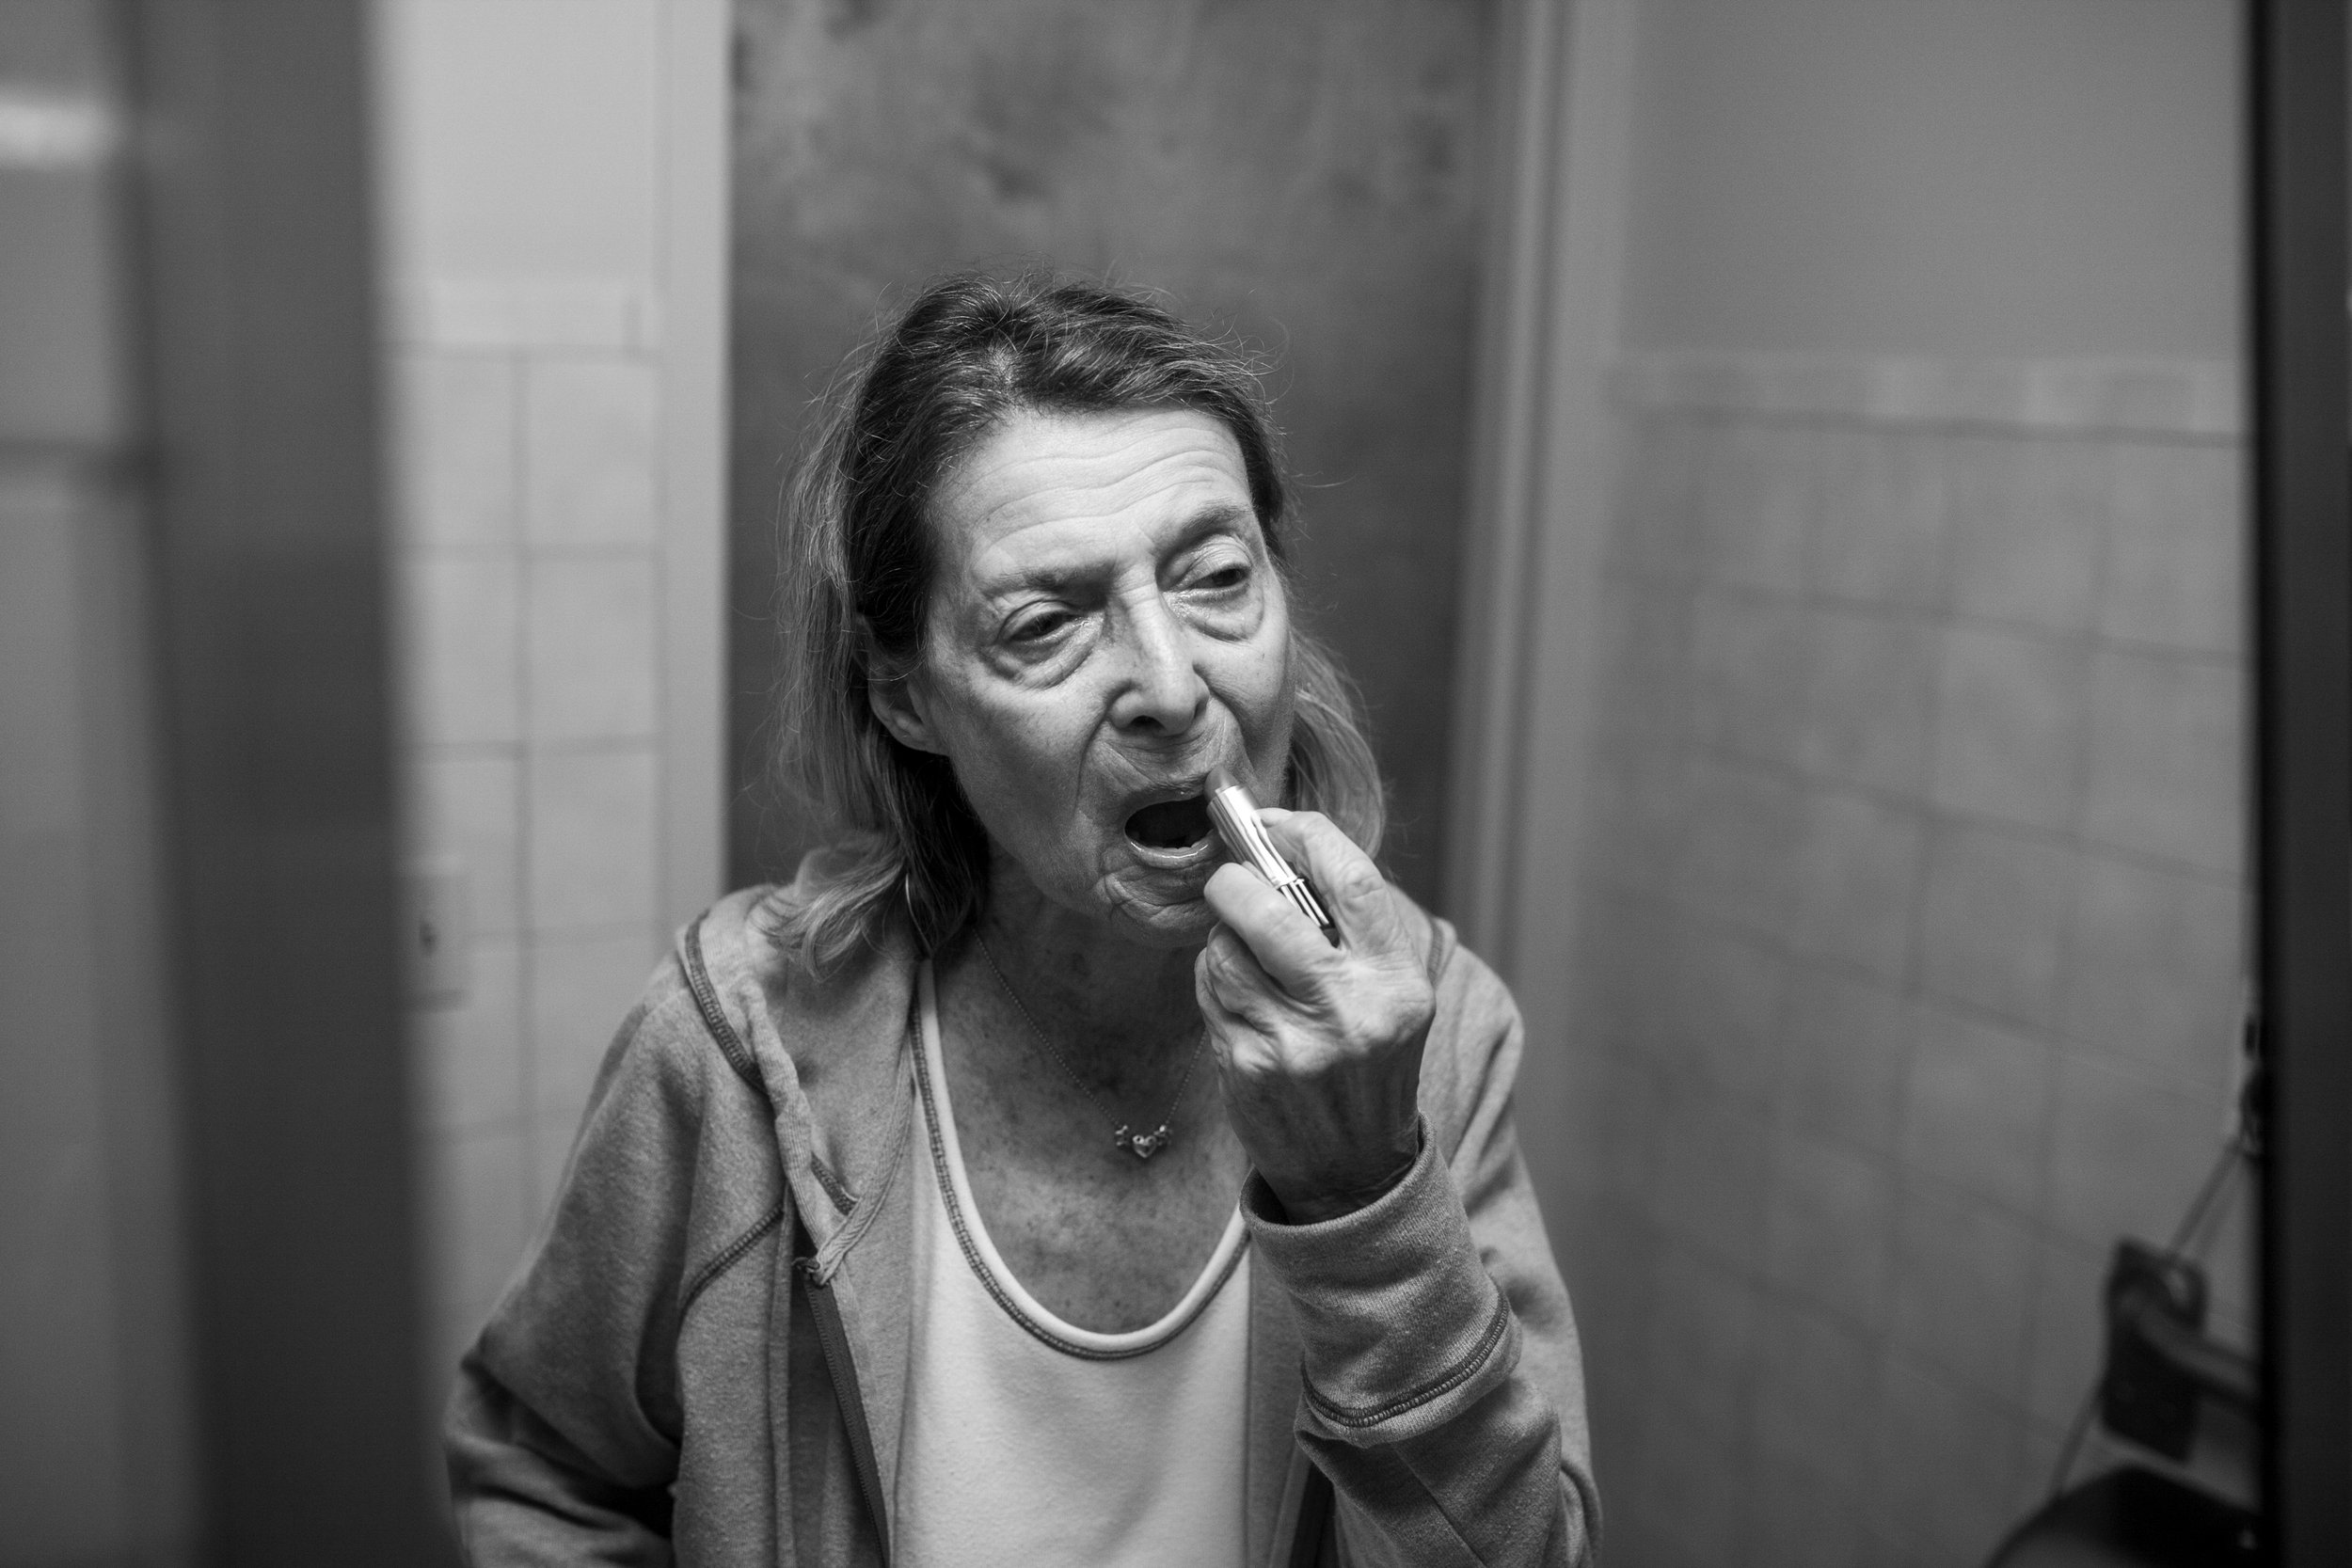  After her hospital stay in 2017, Audrey entered a rehabilitation facility. Here she is putting on her lipstick, thinking she was going to leave with me. She became angry when she found out otherwise. March 2017 